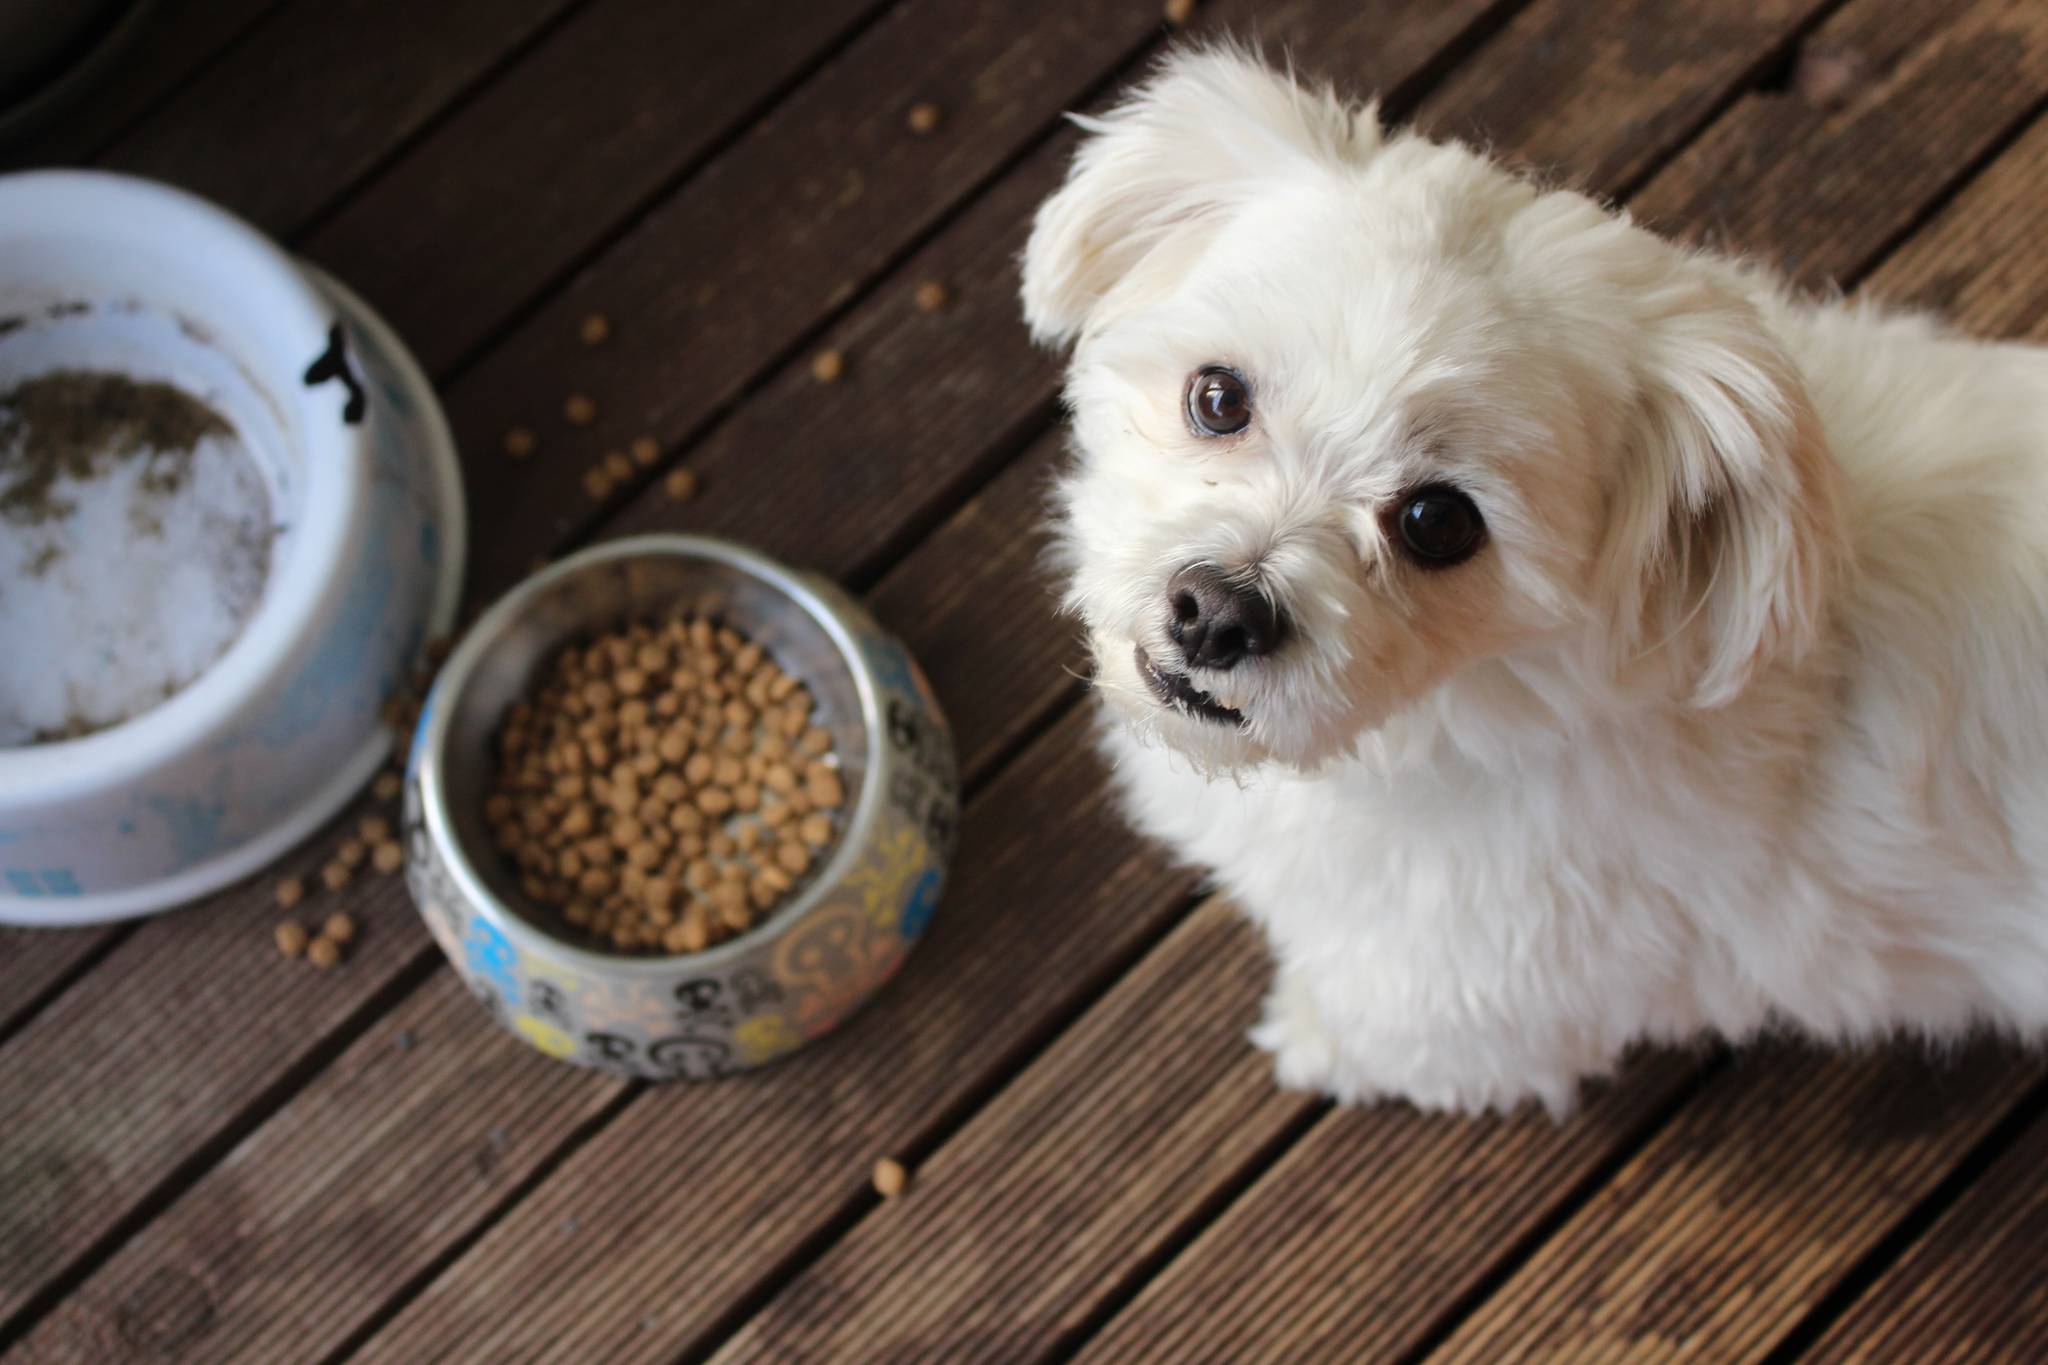 Ÿnsect launches products for eco-friendly pet parents